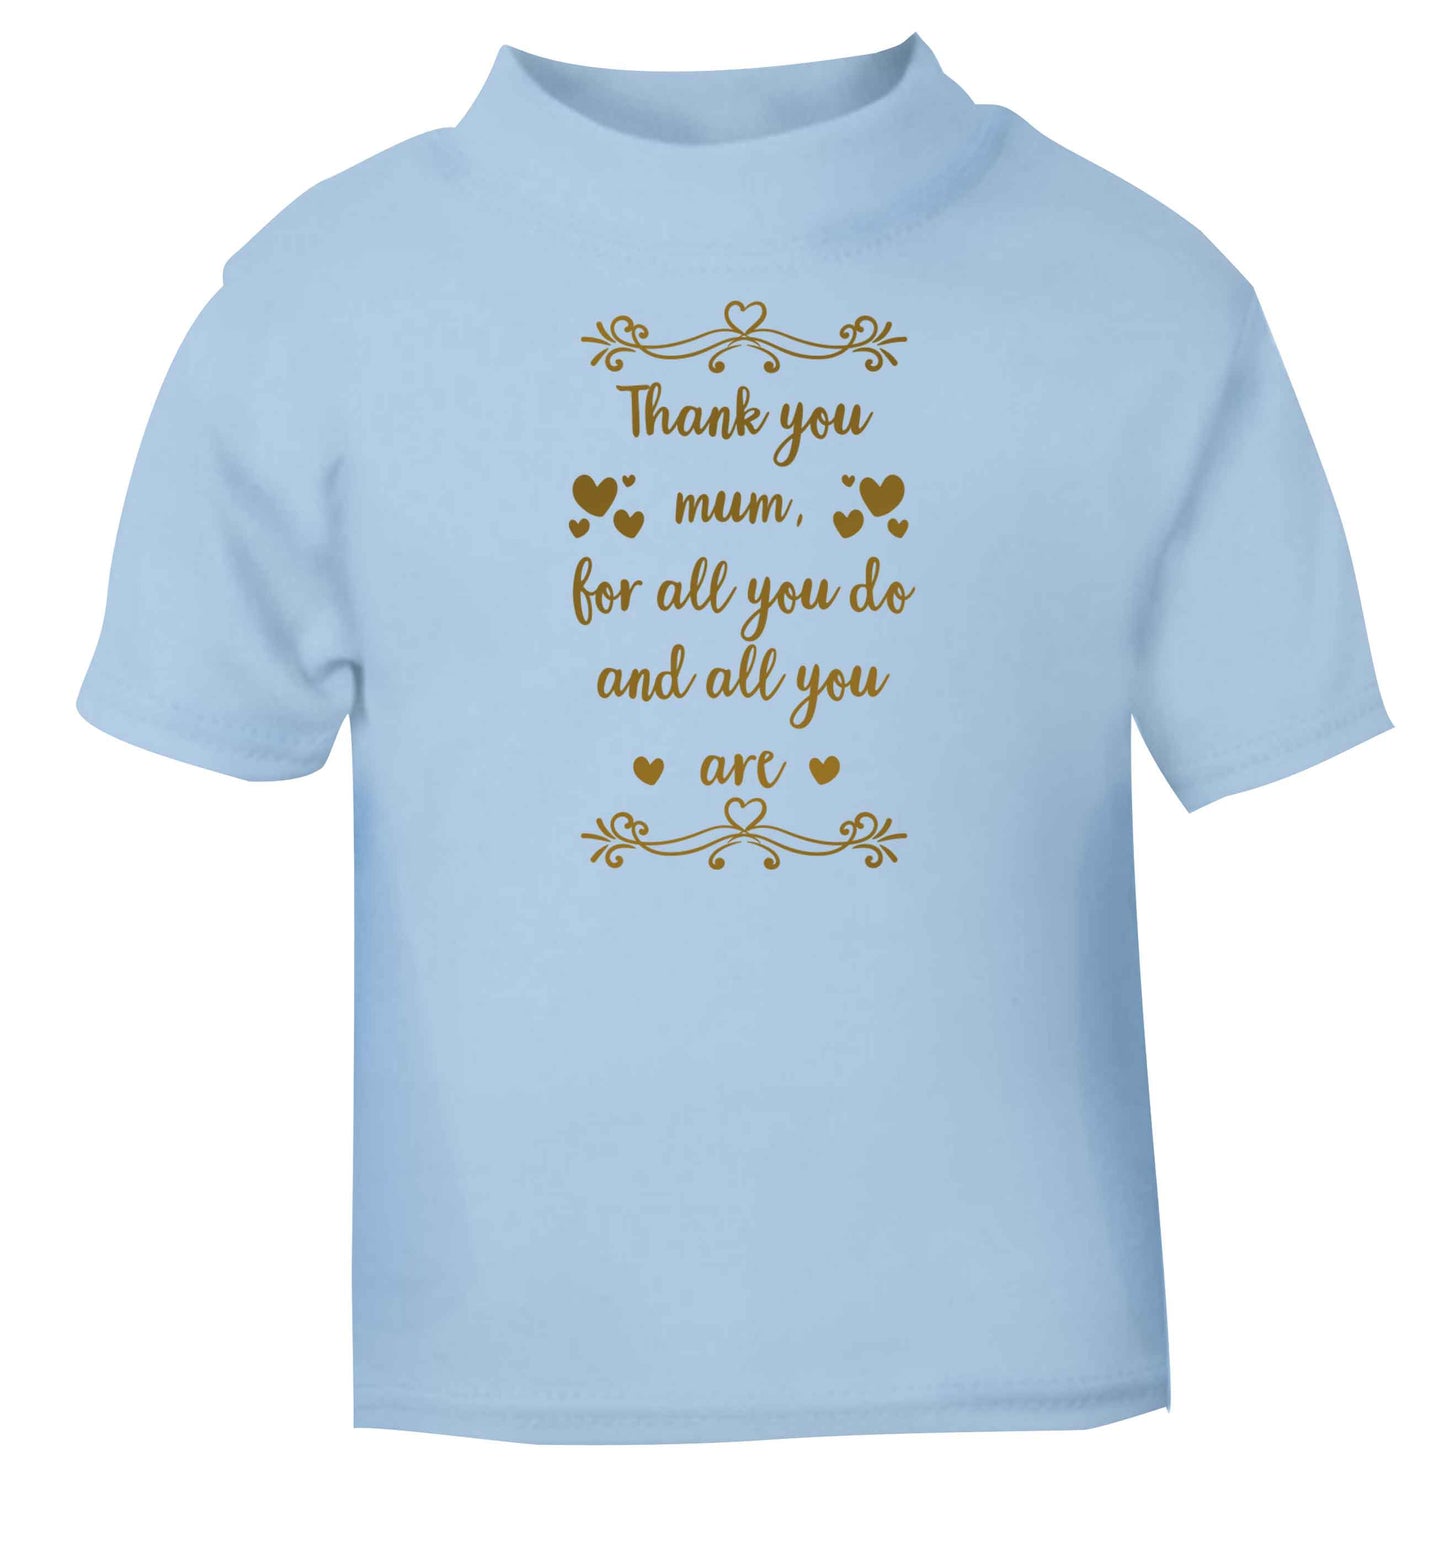 Gorgeous gifts for mums on mother's day! Thank you mum for all you do and all you are light blue baby toddler Tshirt 2 Years